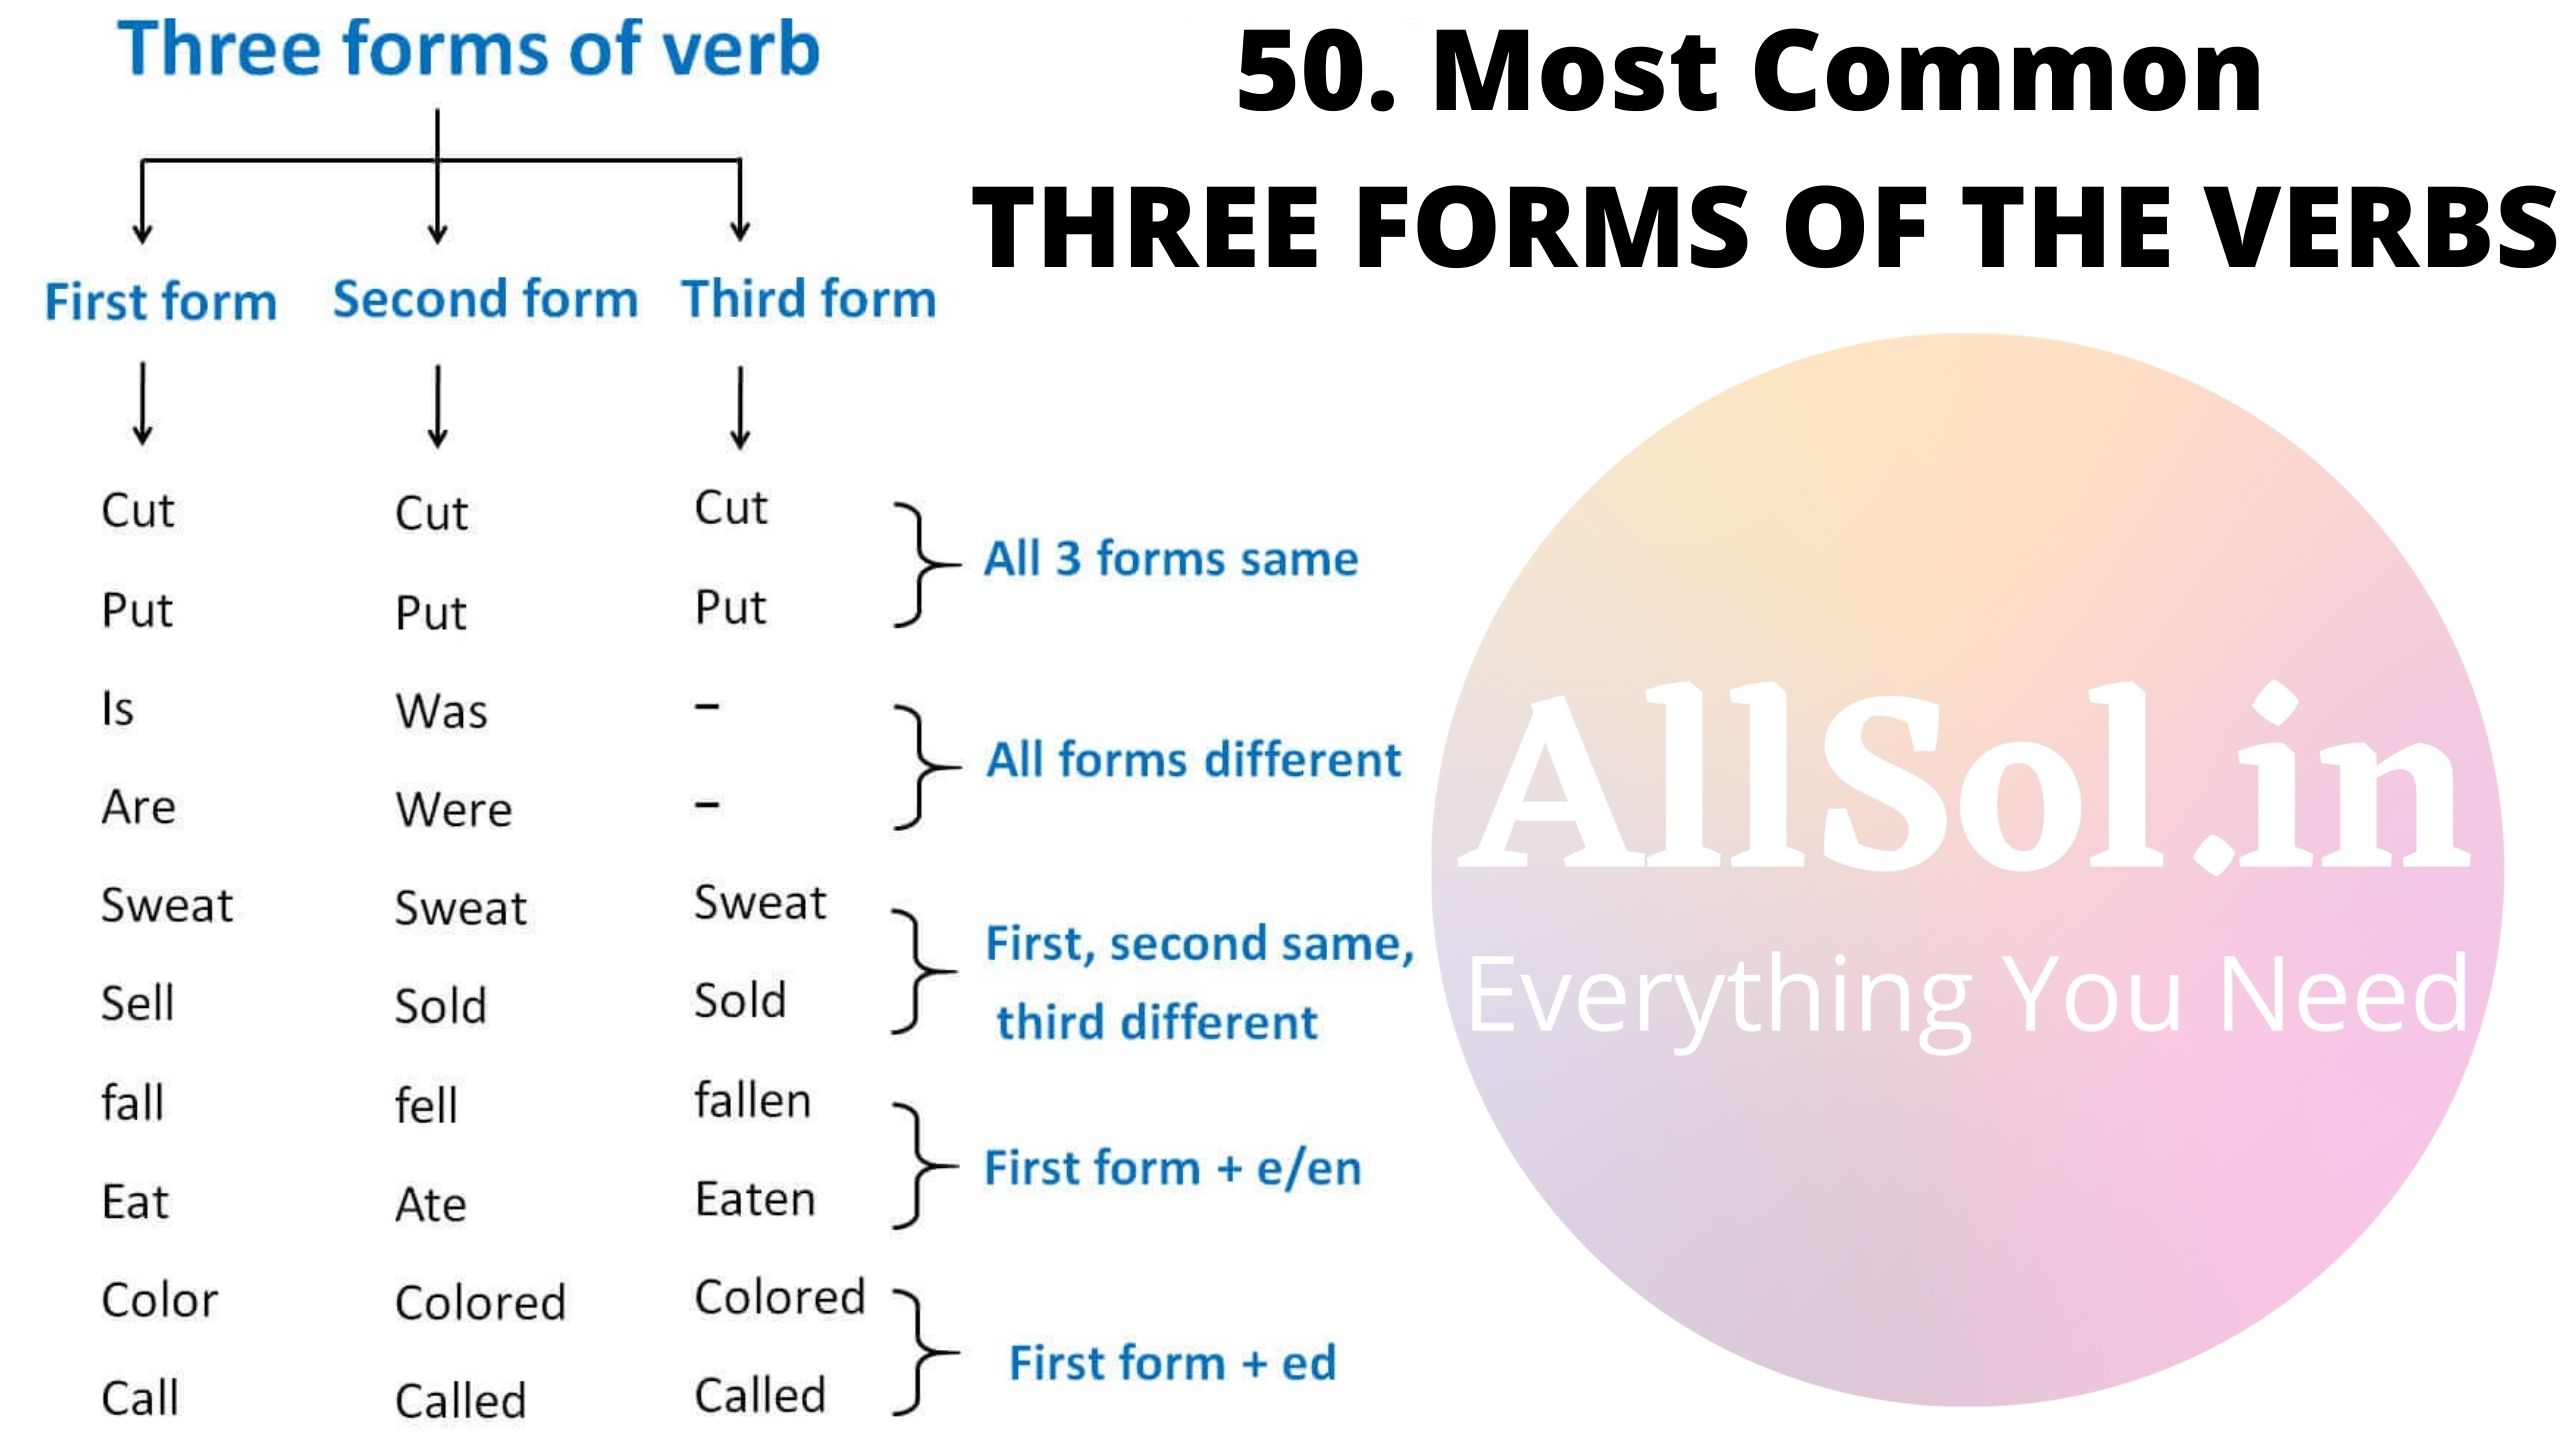 THREE FORMS OF THE VERBS